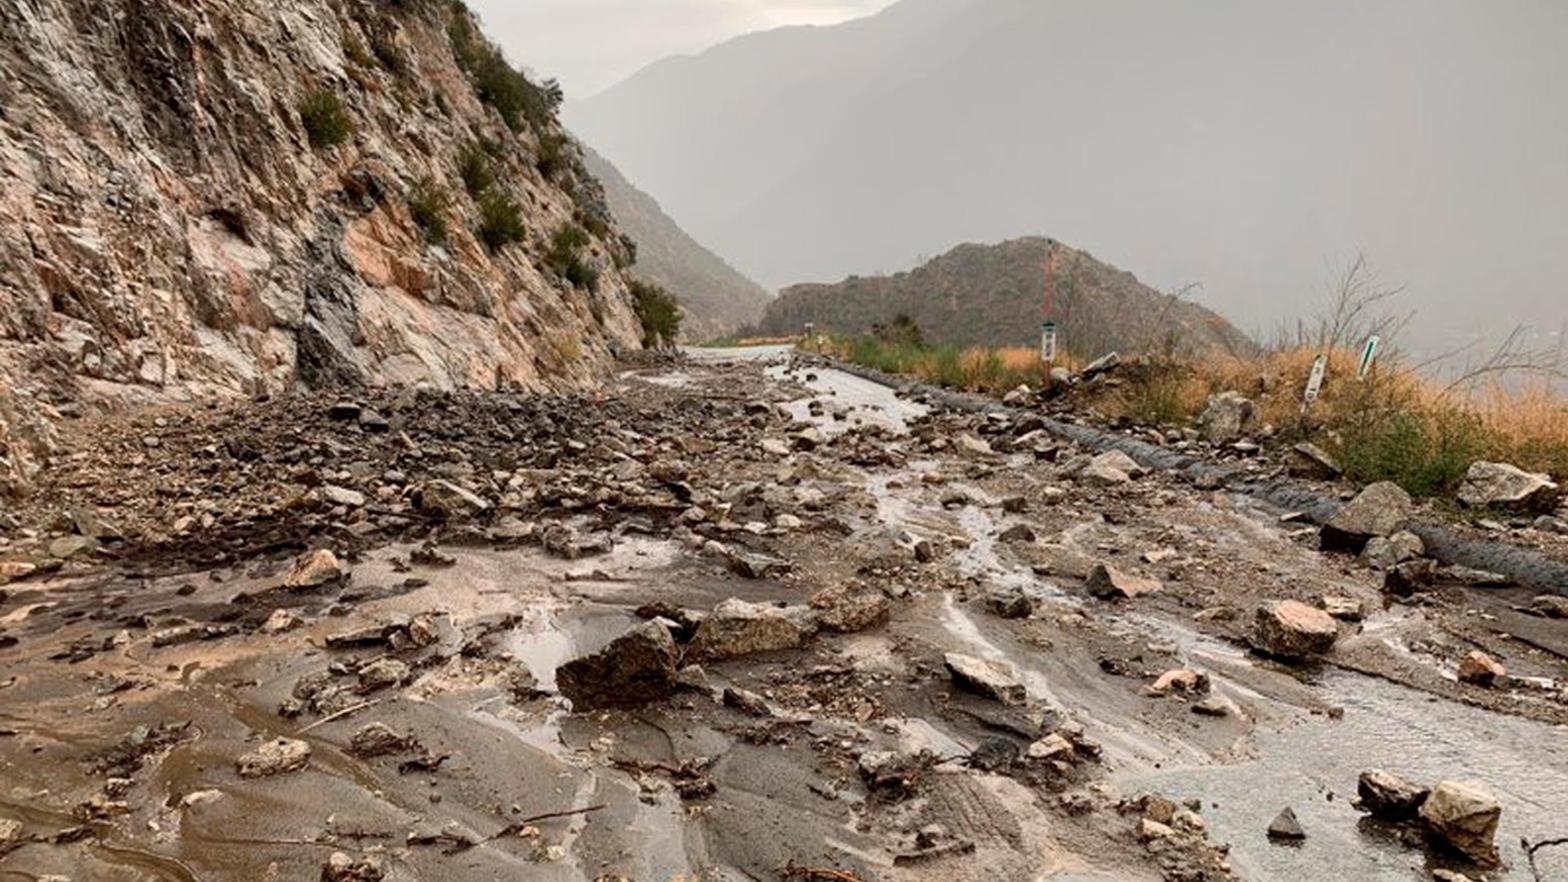 Mudslides closed part of Highway SR-38 in the San Bernardino Mountains, California September 2022. The mud flows and flash flooding occurred in parts of the San Bernardino Mountains where there are burn scars, areas where there's little vegetation to hold the soil, from the 2020 wildfires.  (Photo: Caltrans District 8, AP)